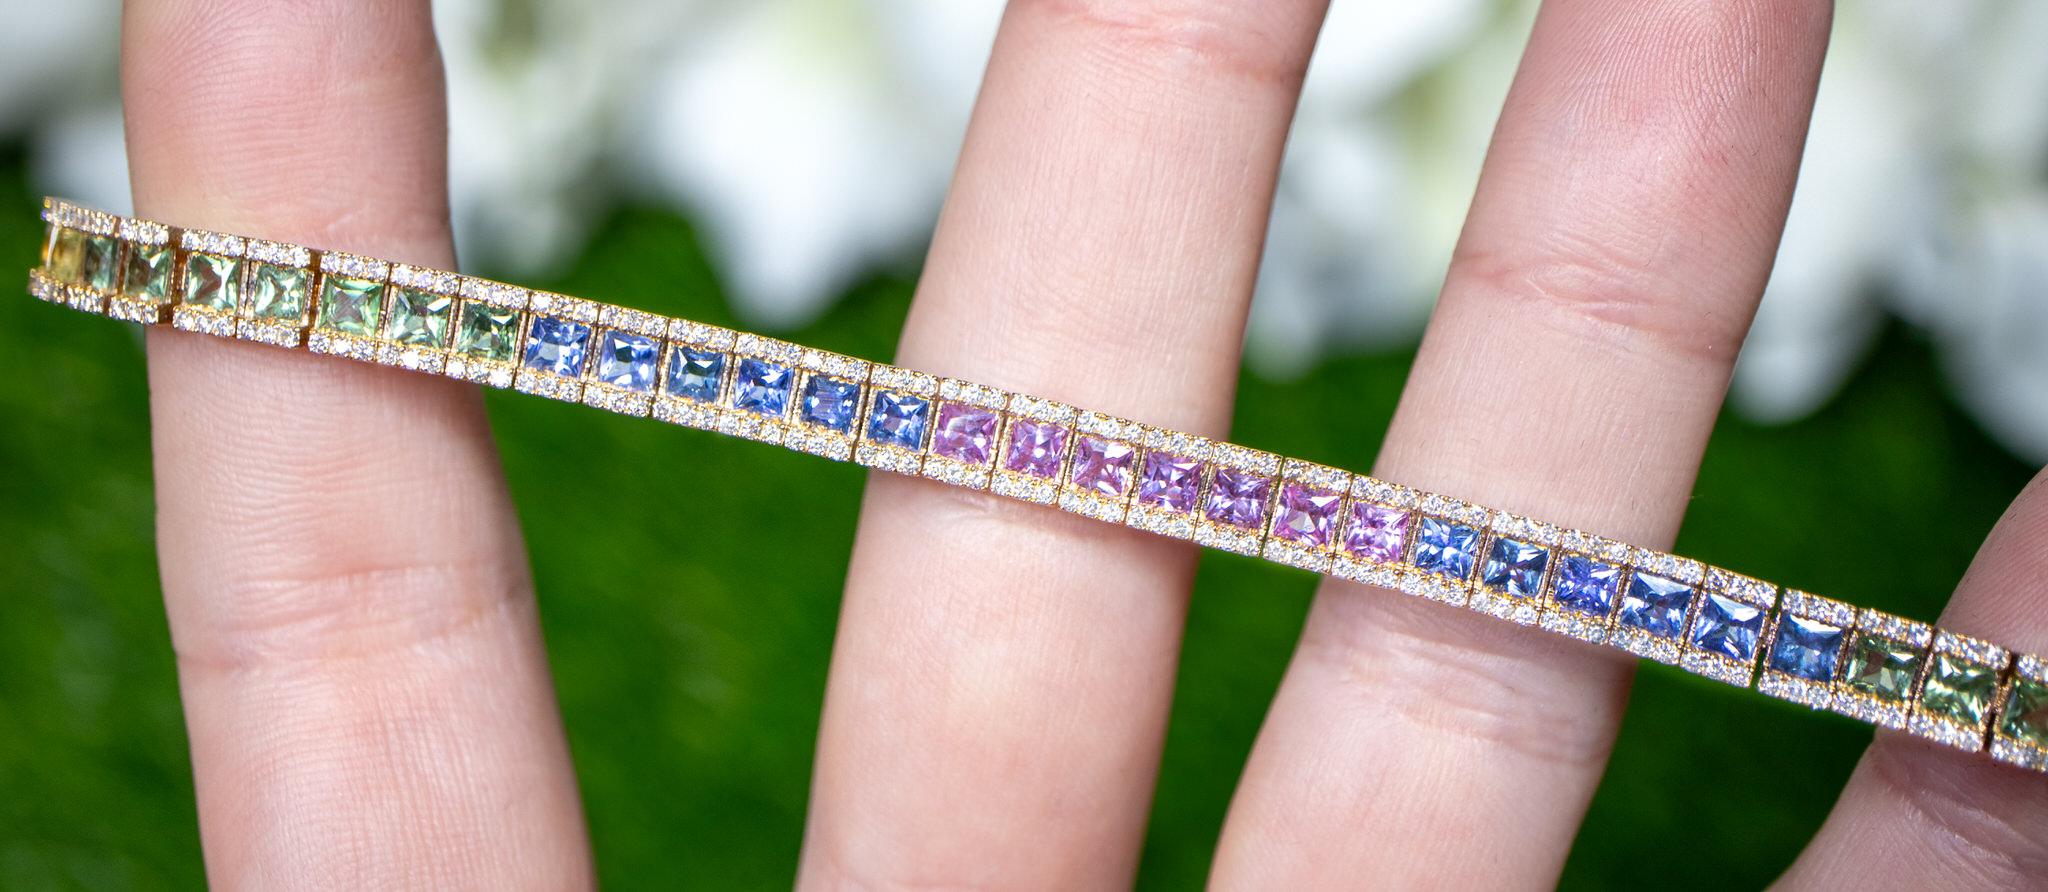 It comes with the Gemological Appraisal by GIA GG/AJP
All Gemstones are Natural
Multicolor Sapphires = 7.48 Carats
Diamonds = 1.52 Carats
Metal: 18K Rose Gold
Length: 7 Inches
Width: 0.21 Inches